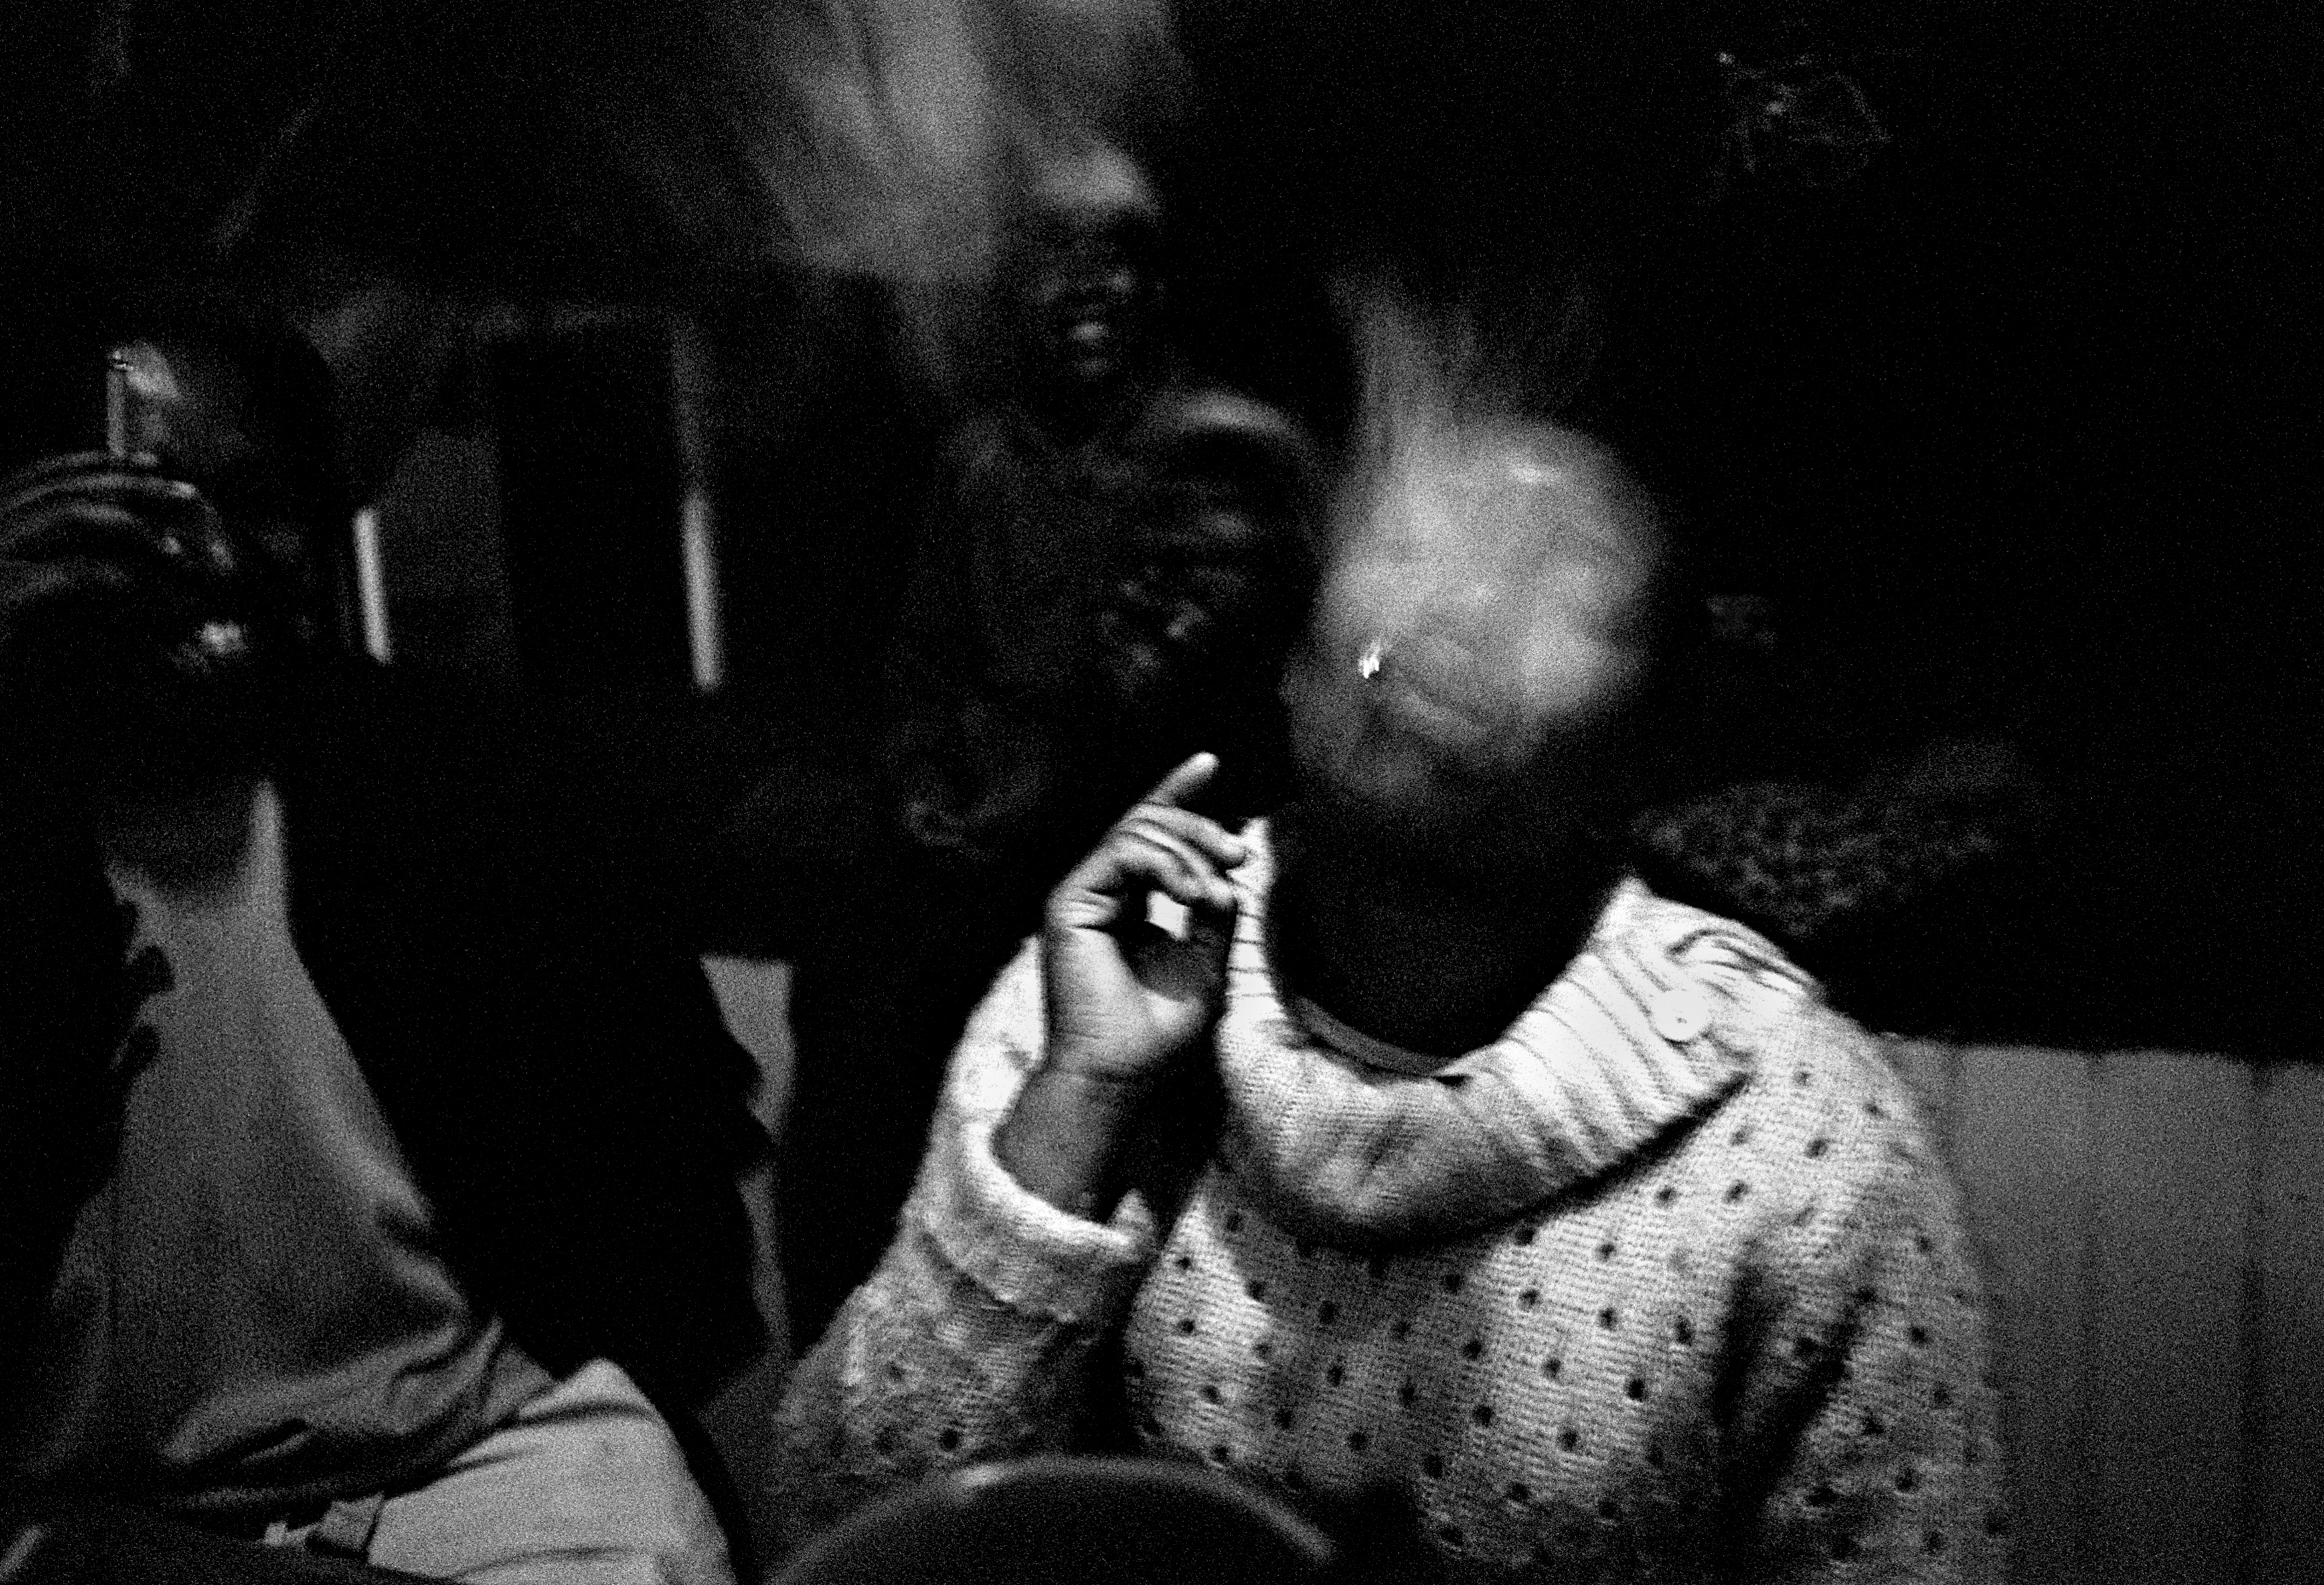 A young Swazi woman parties with men from Johannesburg at a rural bar.